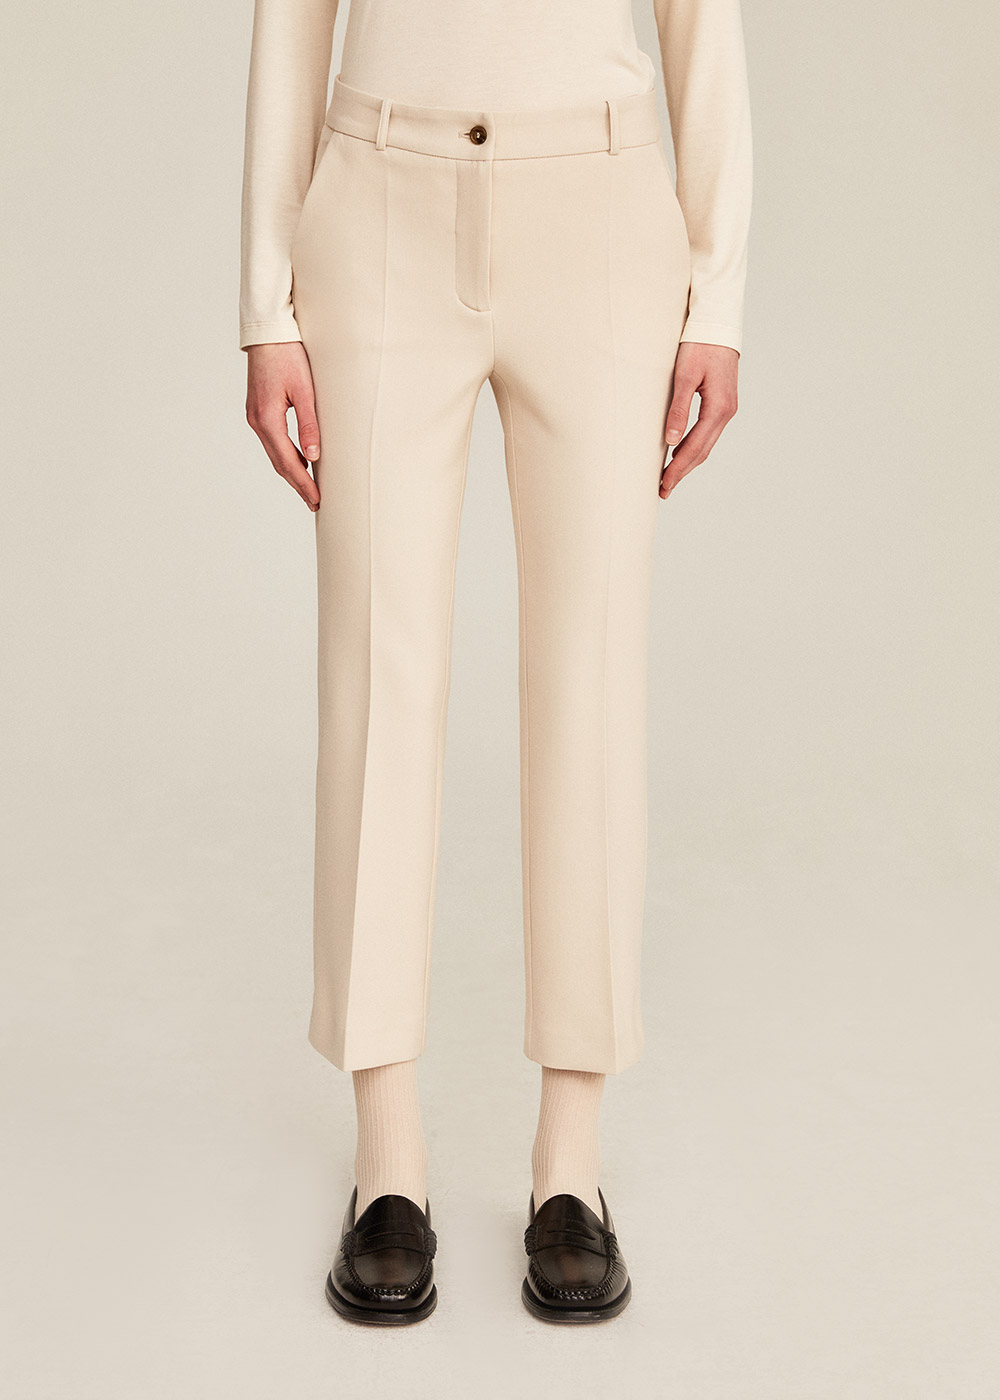 Striped Stretch Wool Cropped Trousers | Michael Kors